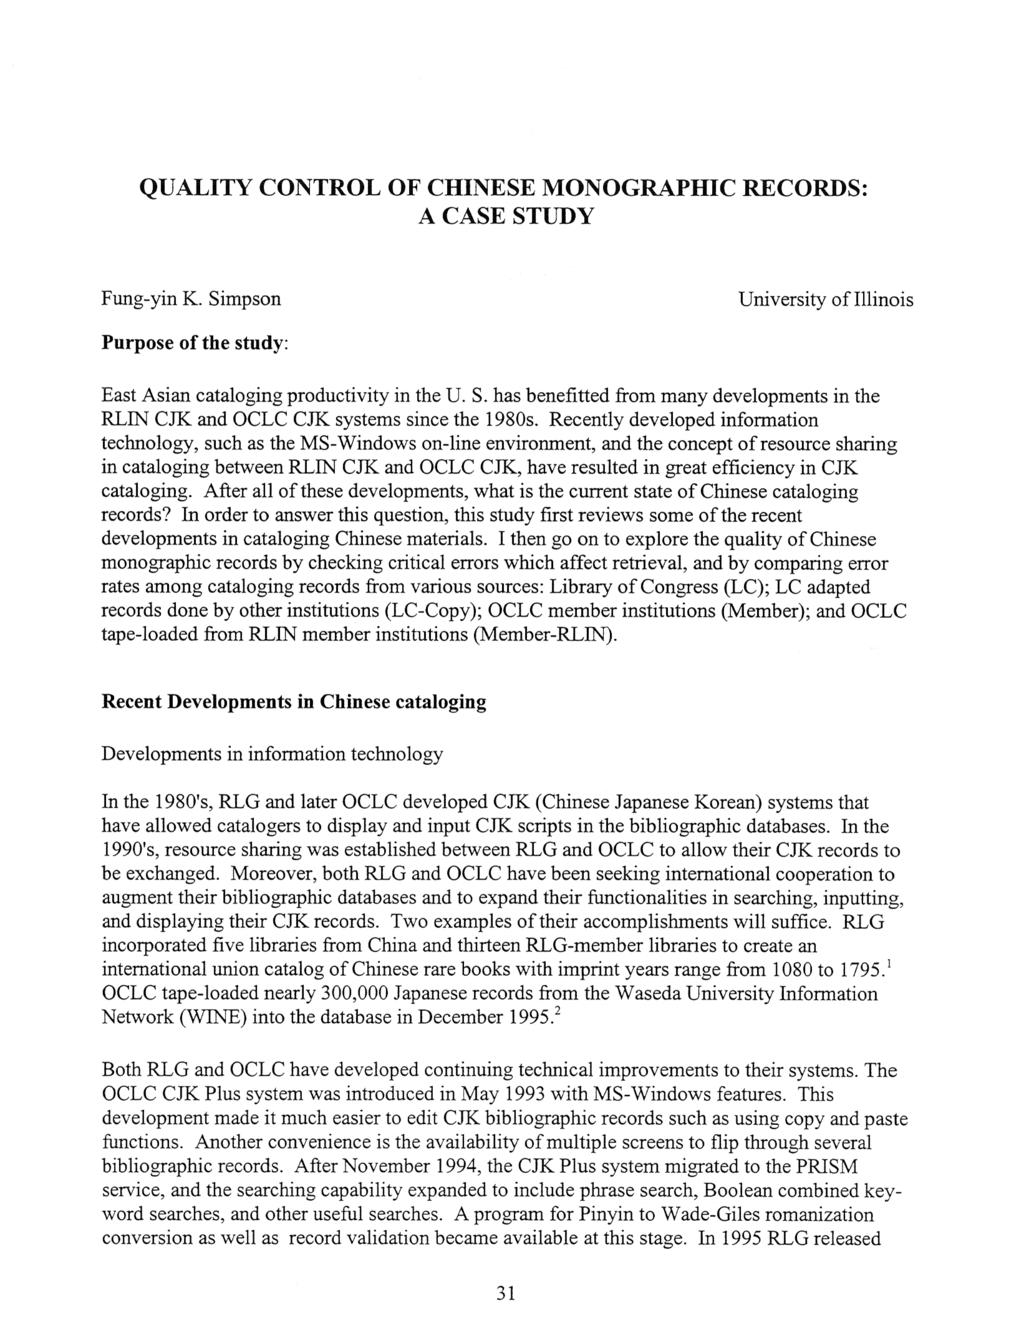 QUALITY CONTROL CHINESE monographic RECORDS CASE STUDY fung yin K simpson university illinois purpose study east asian cataloging productivity U benefitted RLIN RUN CJK OCLC CJK systems since 1980s